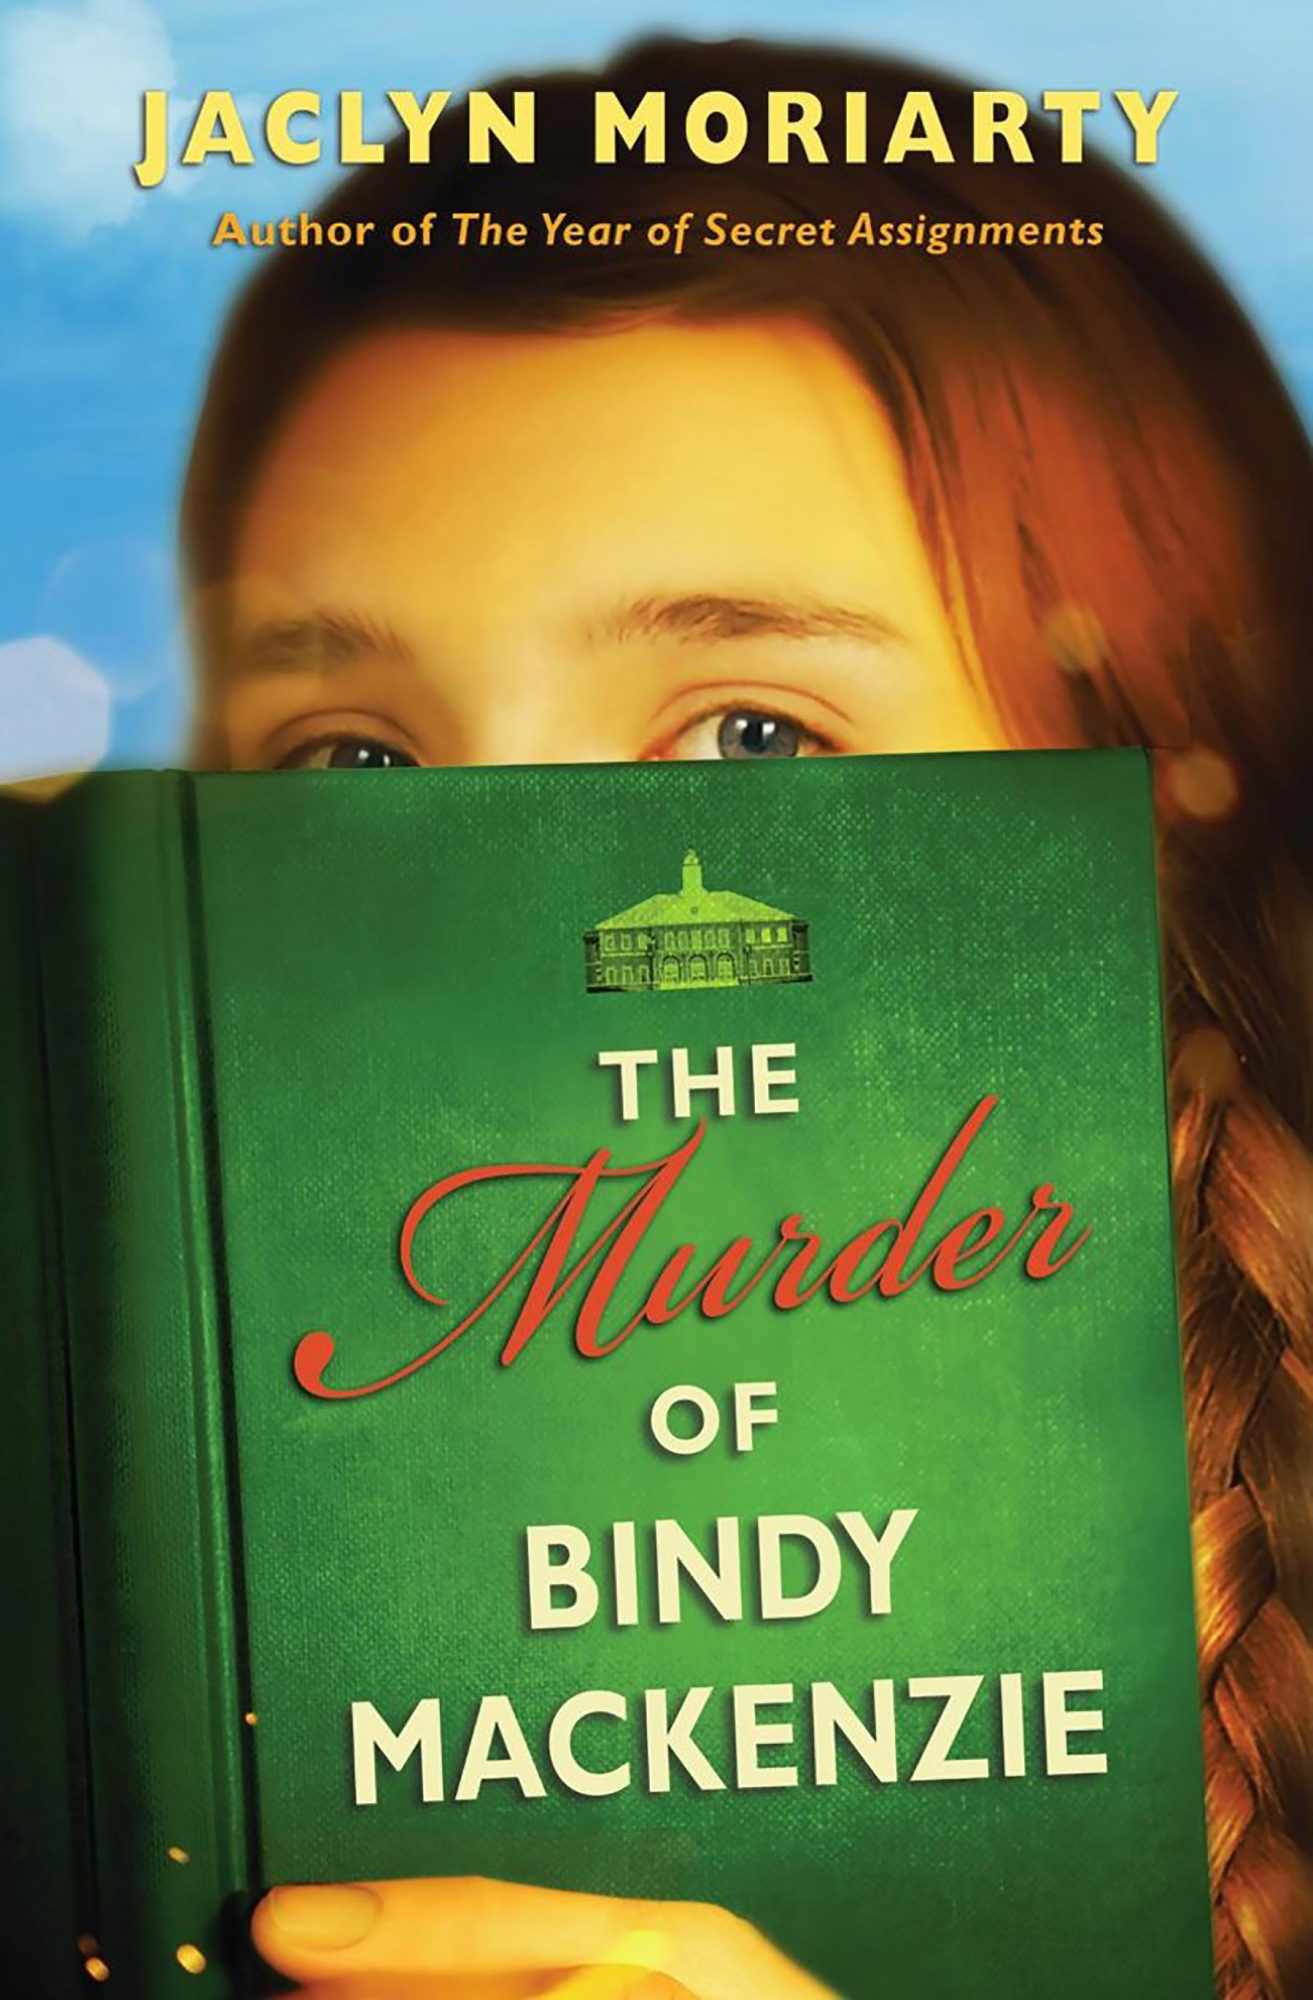 The Murder of Bindy Mackenzie by Jaclyn Moriarty CR: Scholastic